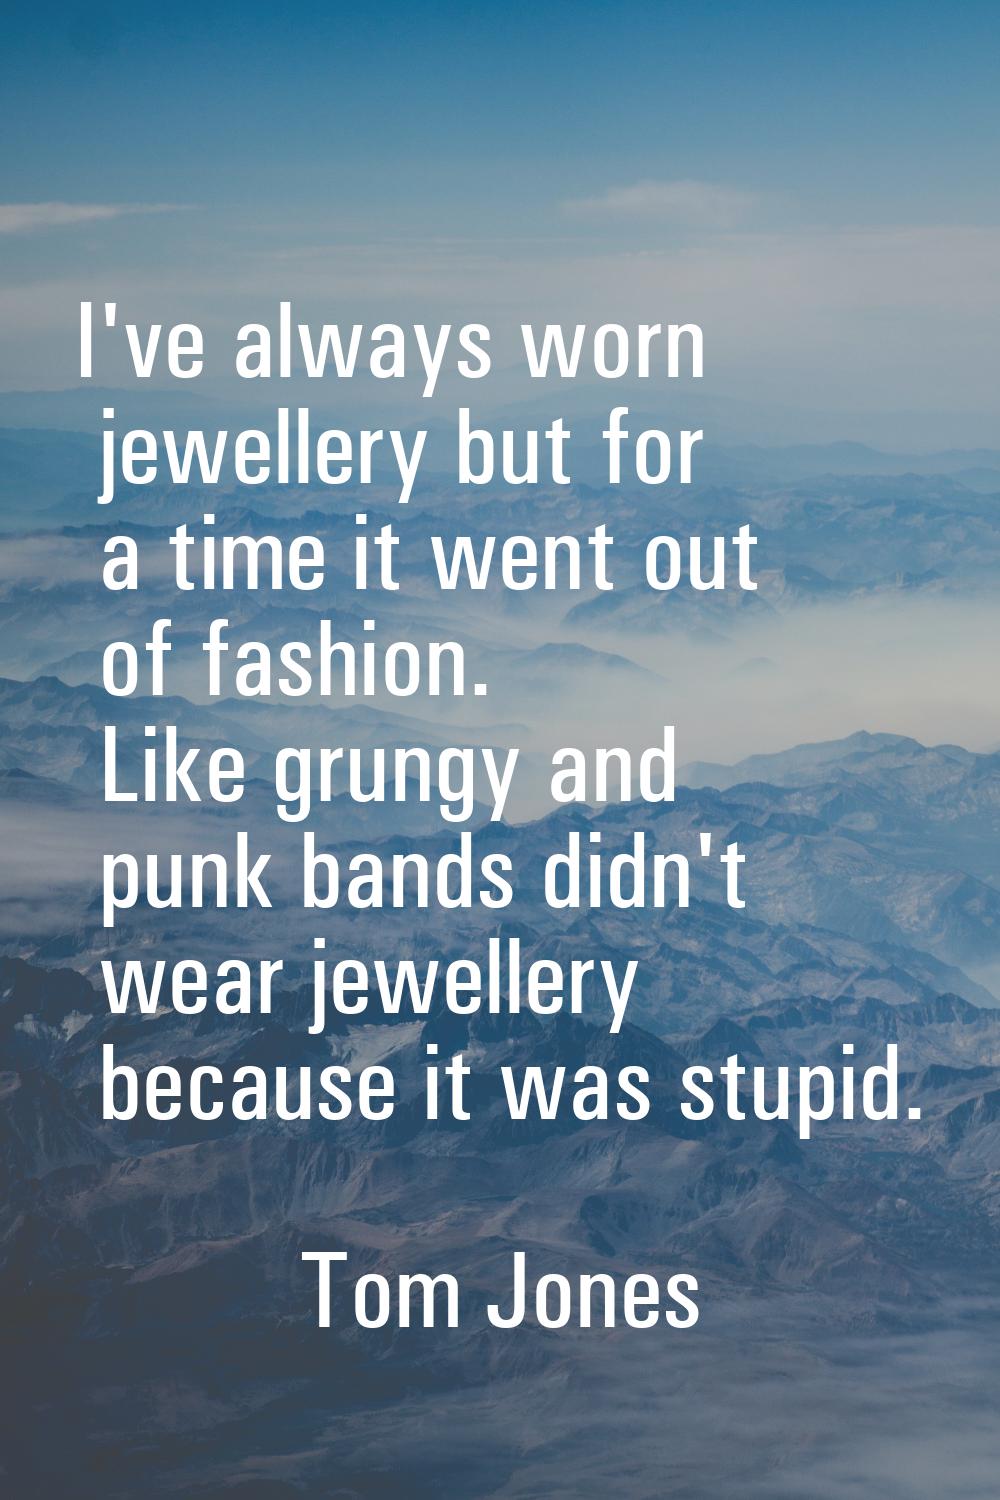 I've always worn jewellery but for a time it went out of fashion. Like grungy and punk bands didn't